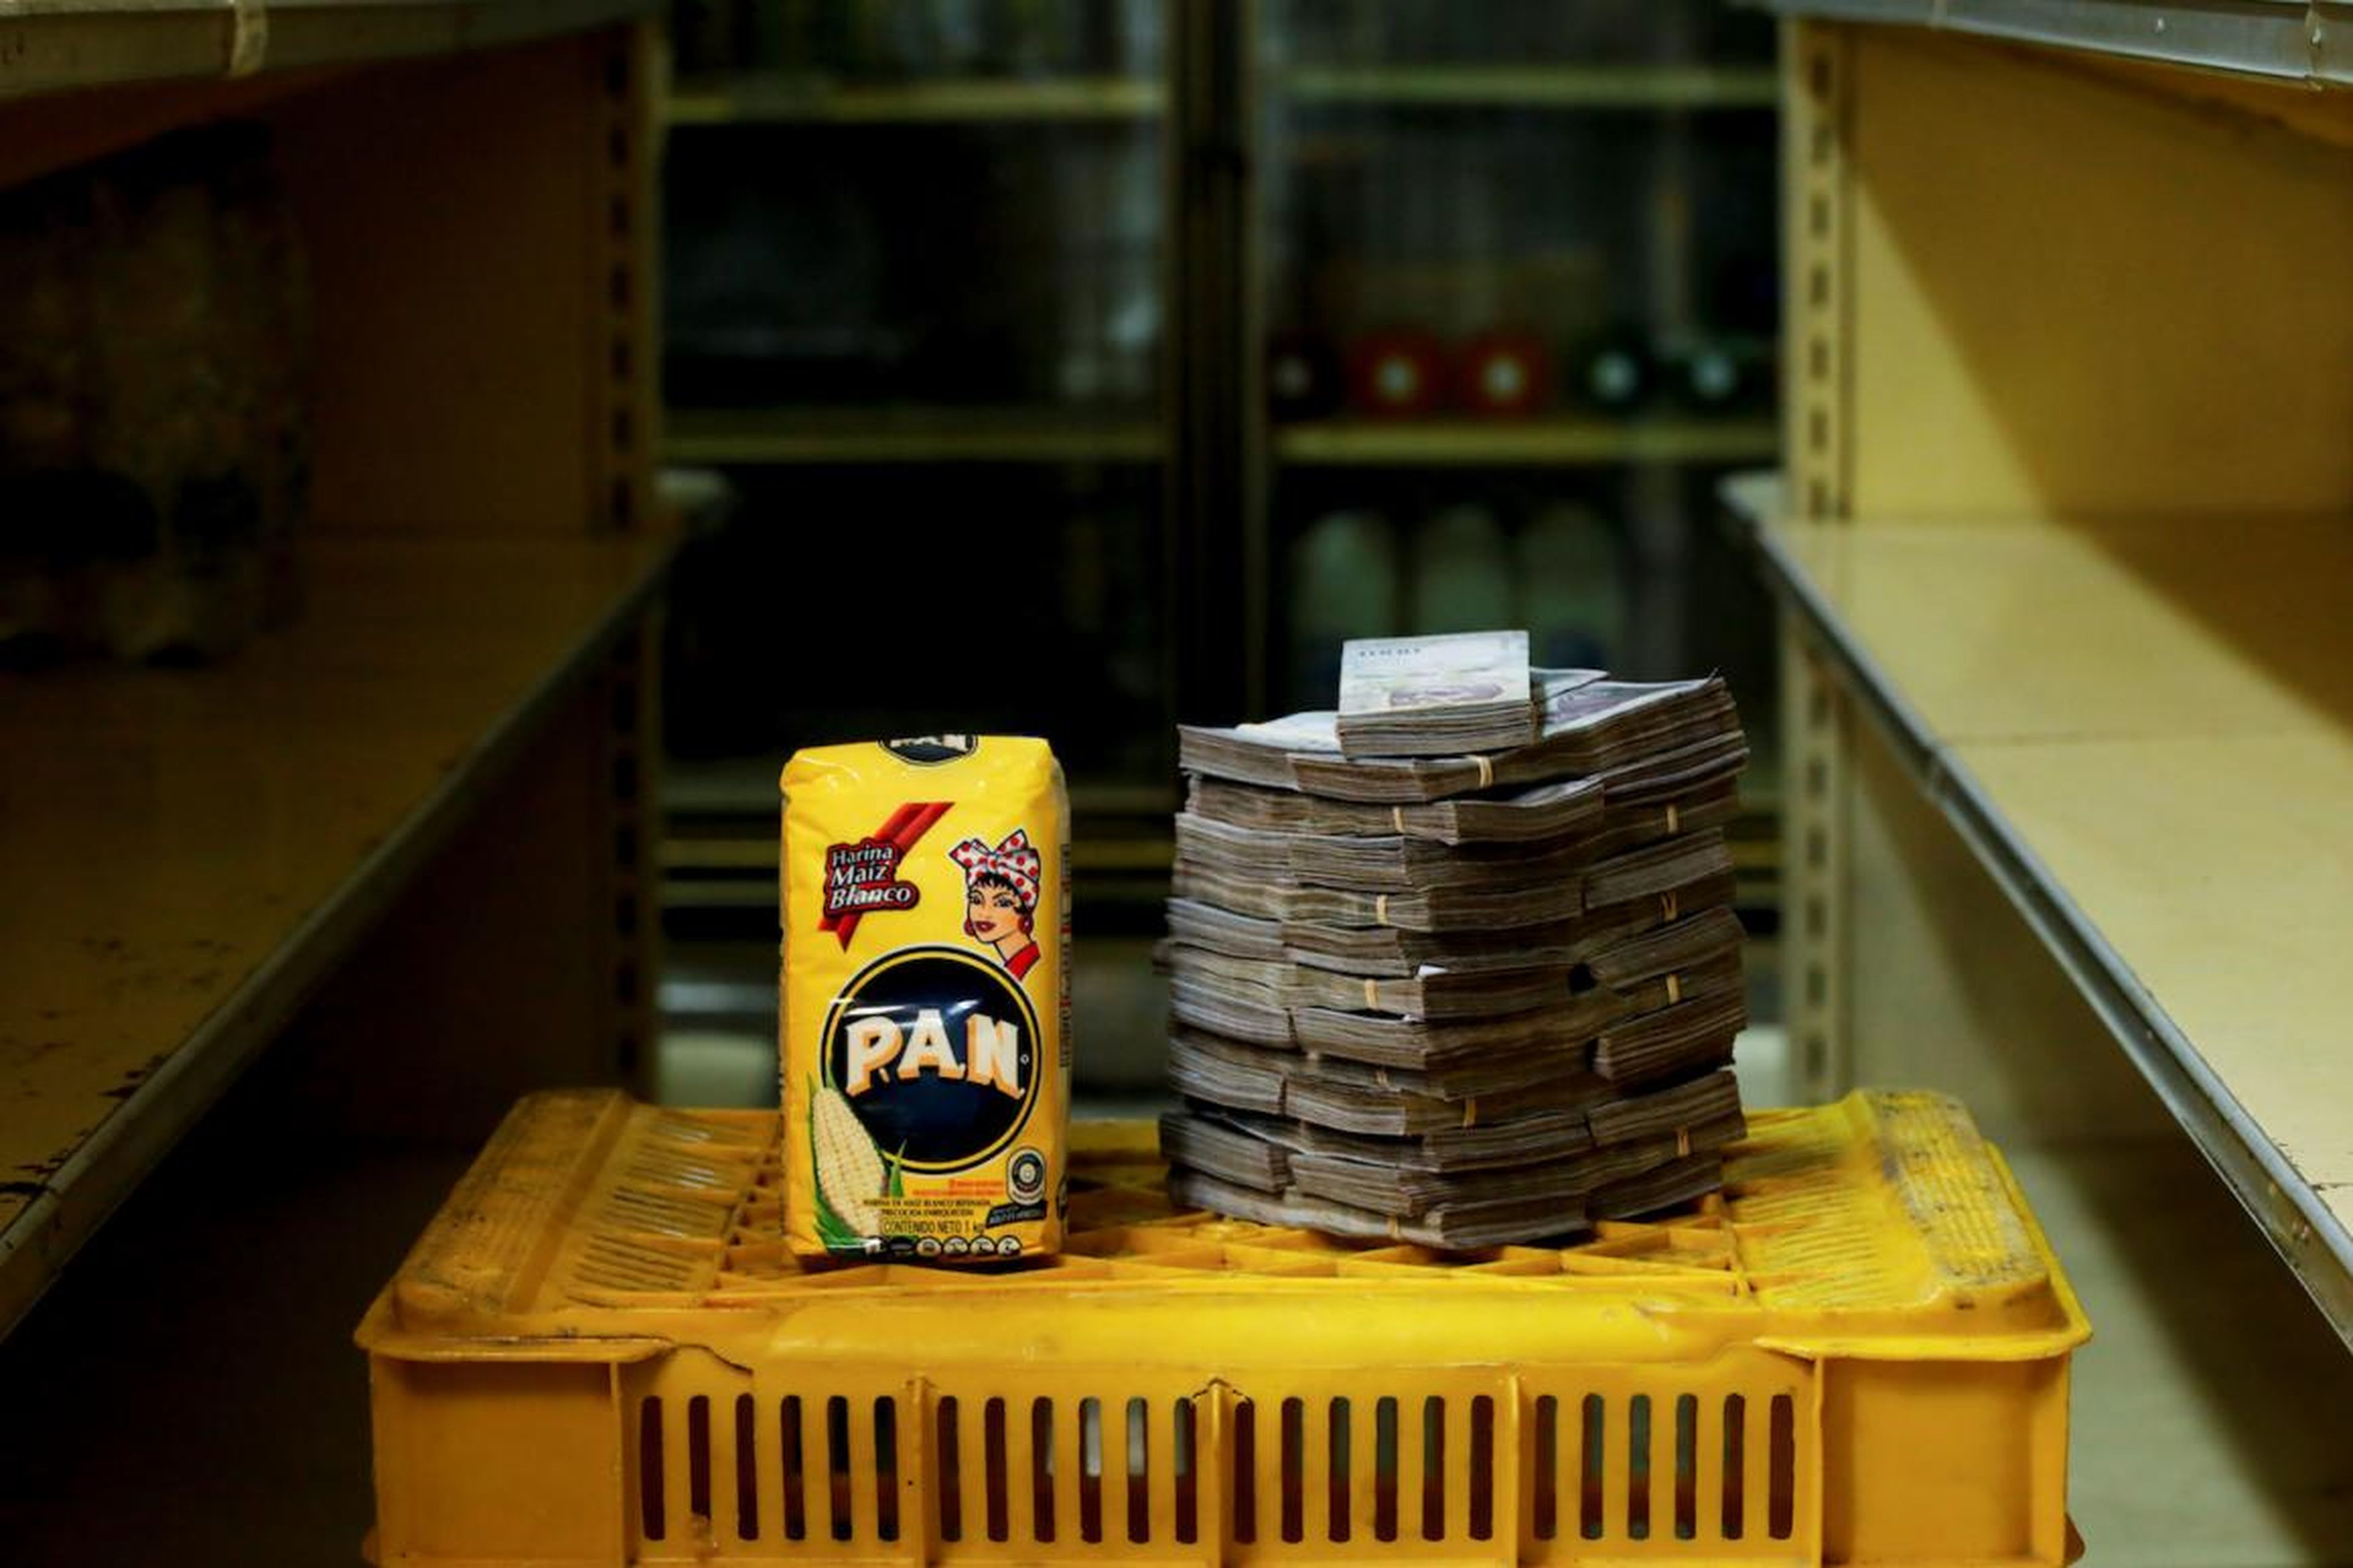 A package of 1kg of corn flour is pictured next to 2,500,000 bolivars, its price and the equivalent of 0.38 USD, at a mini-market in Caracas, Venezuela.